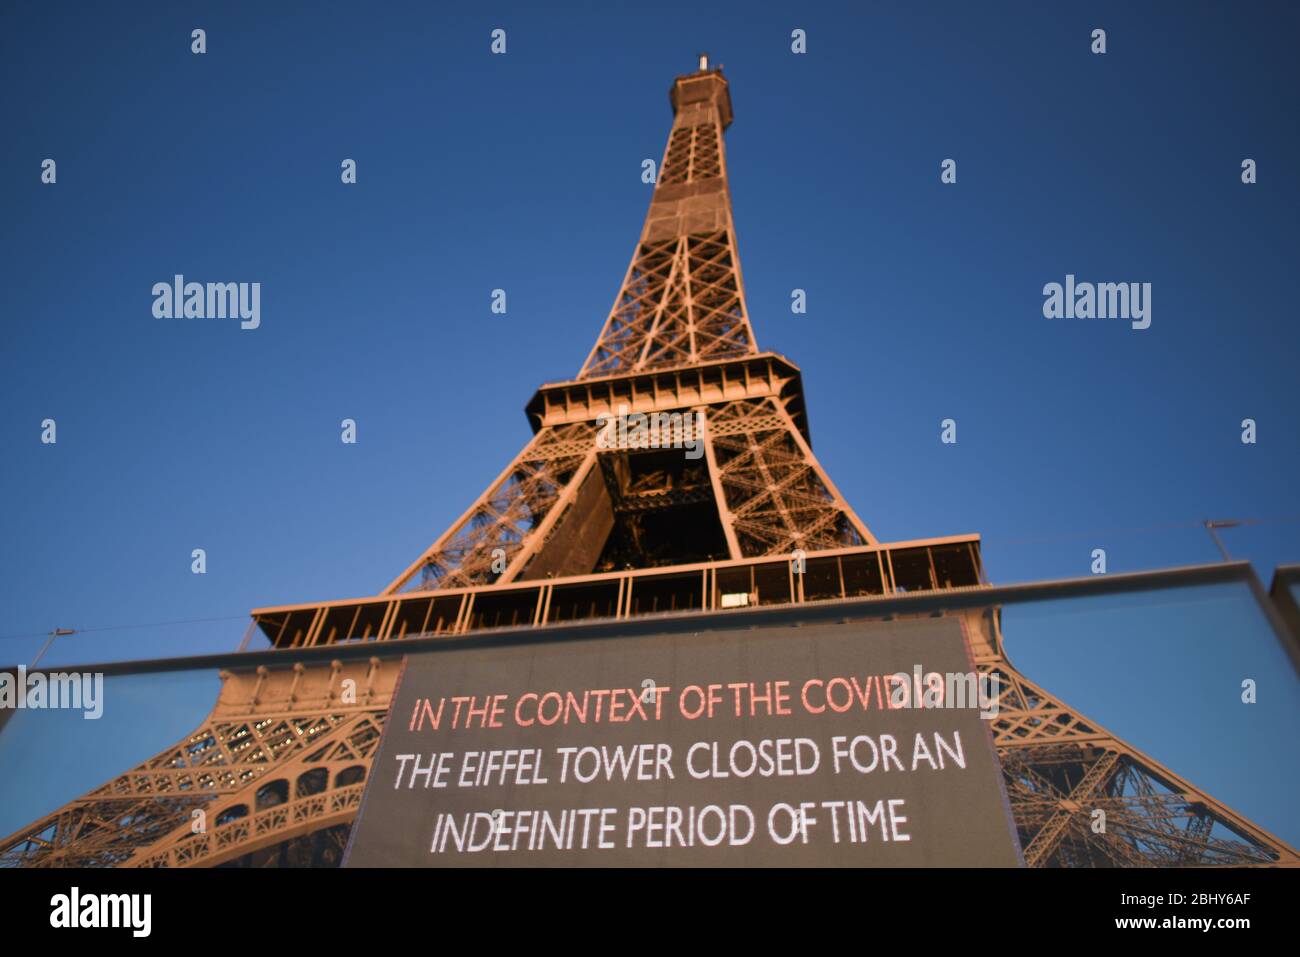 STRICTLY NO SALES TO FRENCH MEDIA OR PUBLISHERS - RIGHTS RESERVED ***April  26, 2020 - Paris, France: A message related to the Covid-19 crisis on the  Eiffel tower, which has been